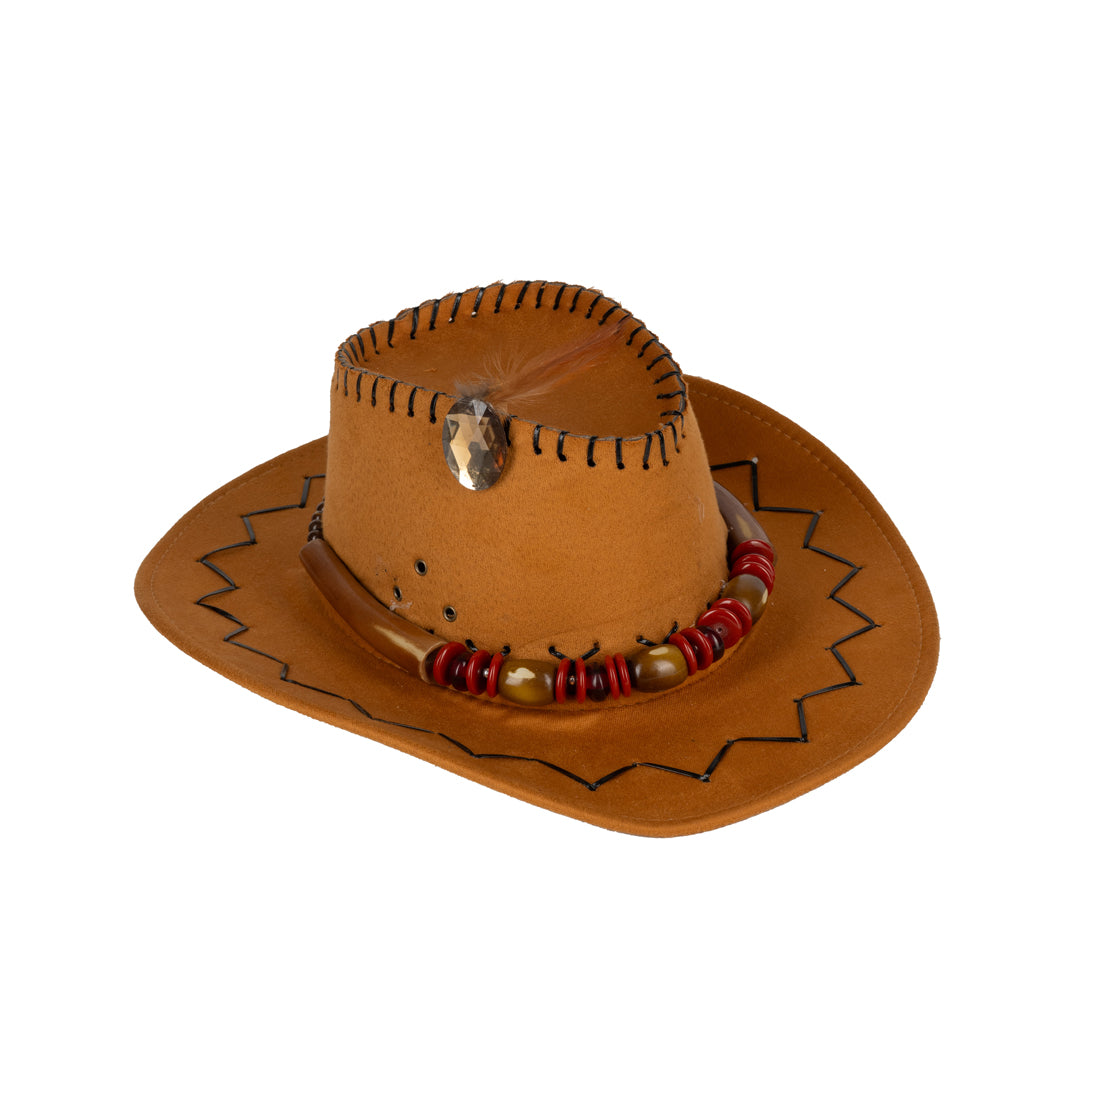 Camel Cowboy Brand New Hat with Accessories